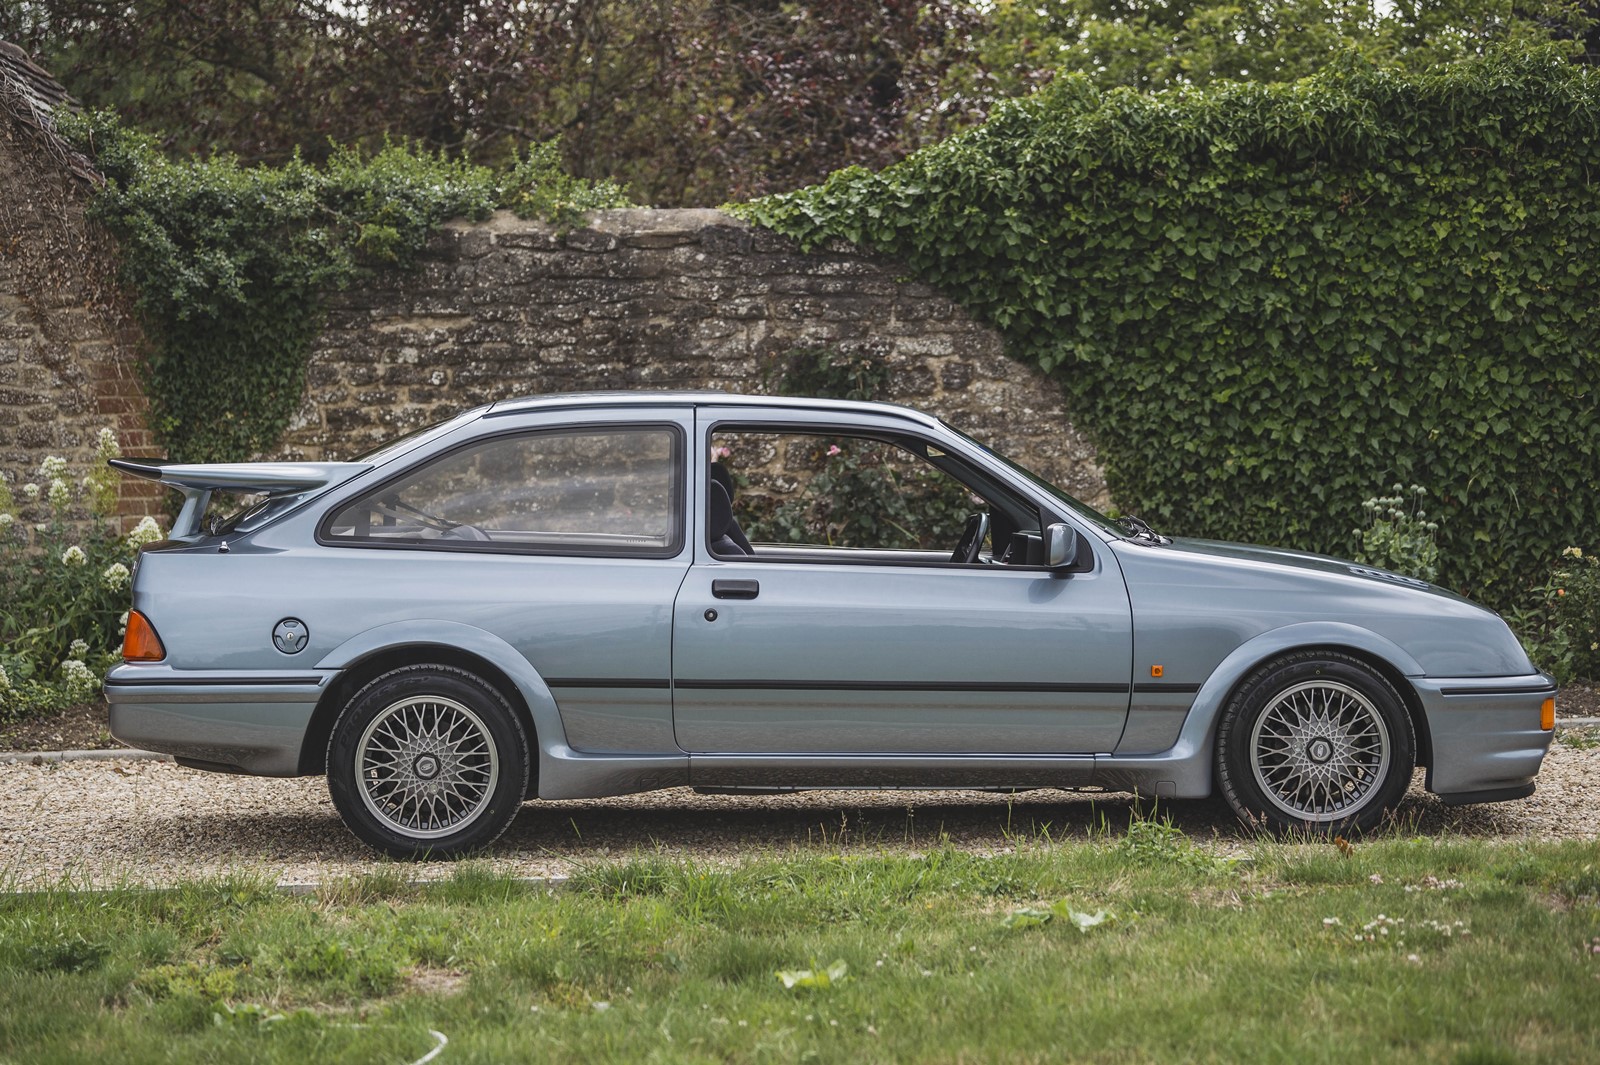 The most unique Ford Sierra RS Cosworth you can imagine is for sale